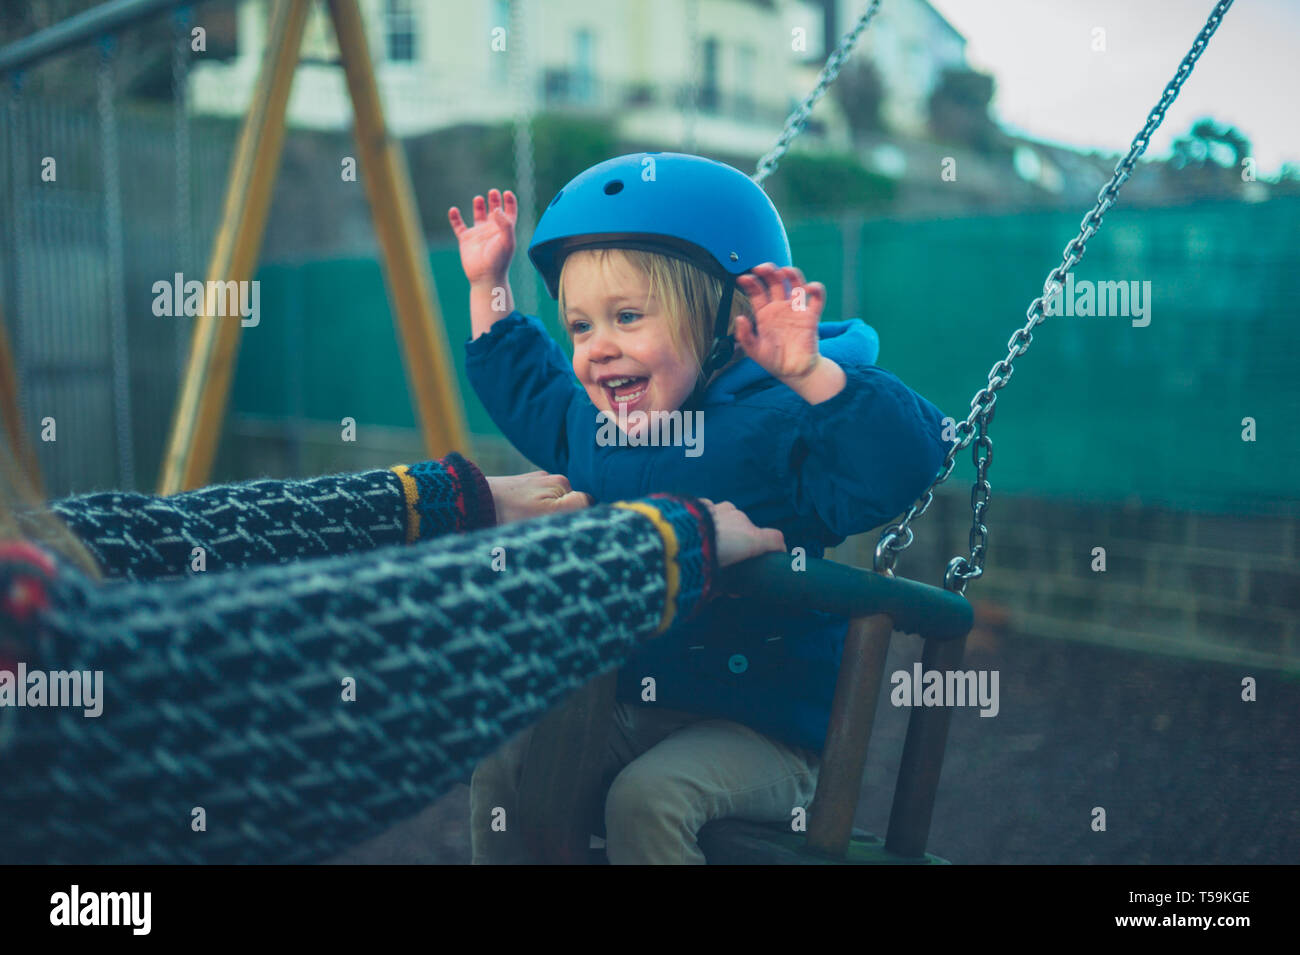 A little toddler wearing a helmet is on the swing in the playground Stock Photo